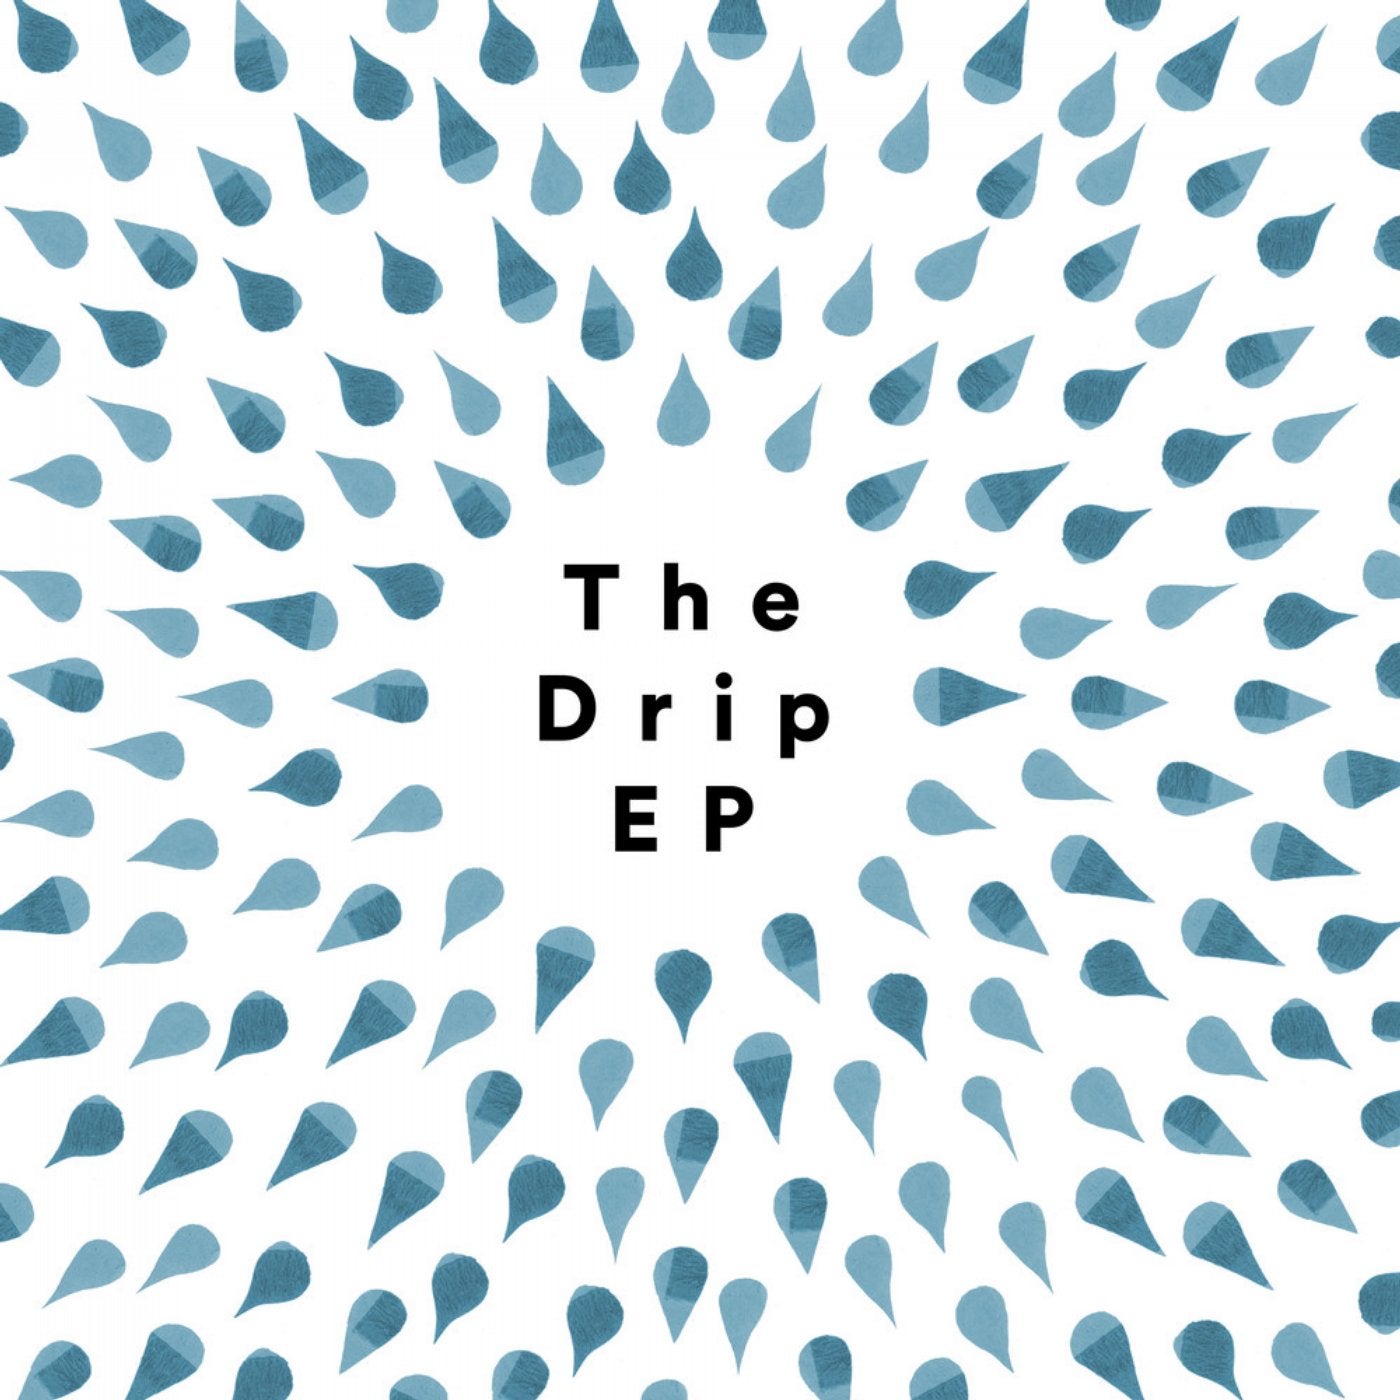 The Drip - EP